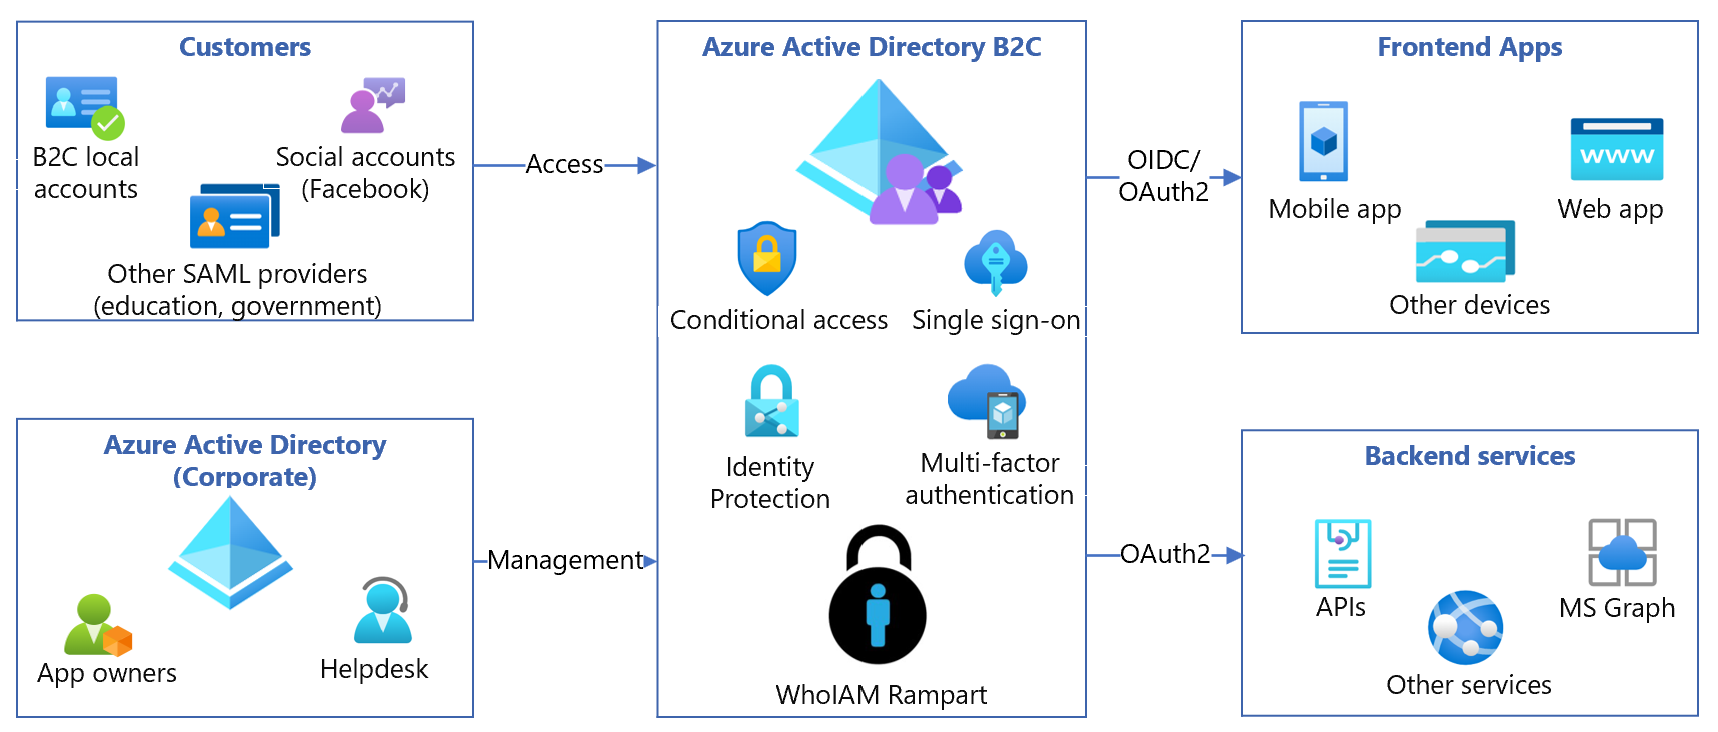 Diagram showing the WhoIAM Rampart integration scenario for Azure AD B2C.